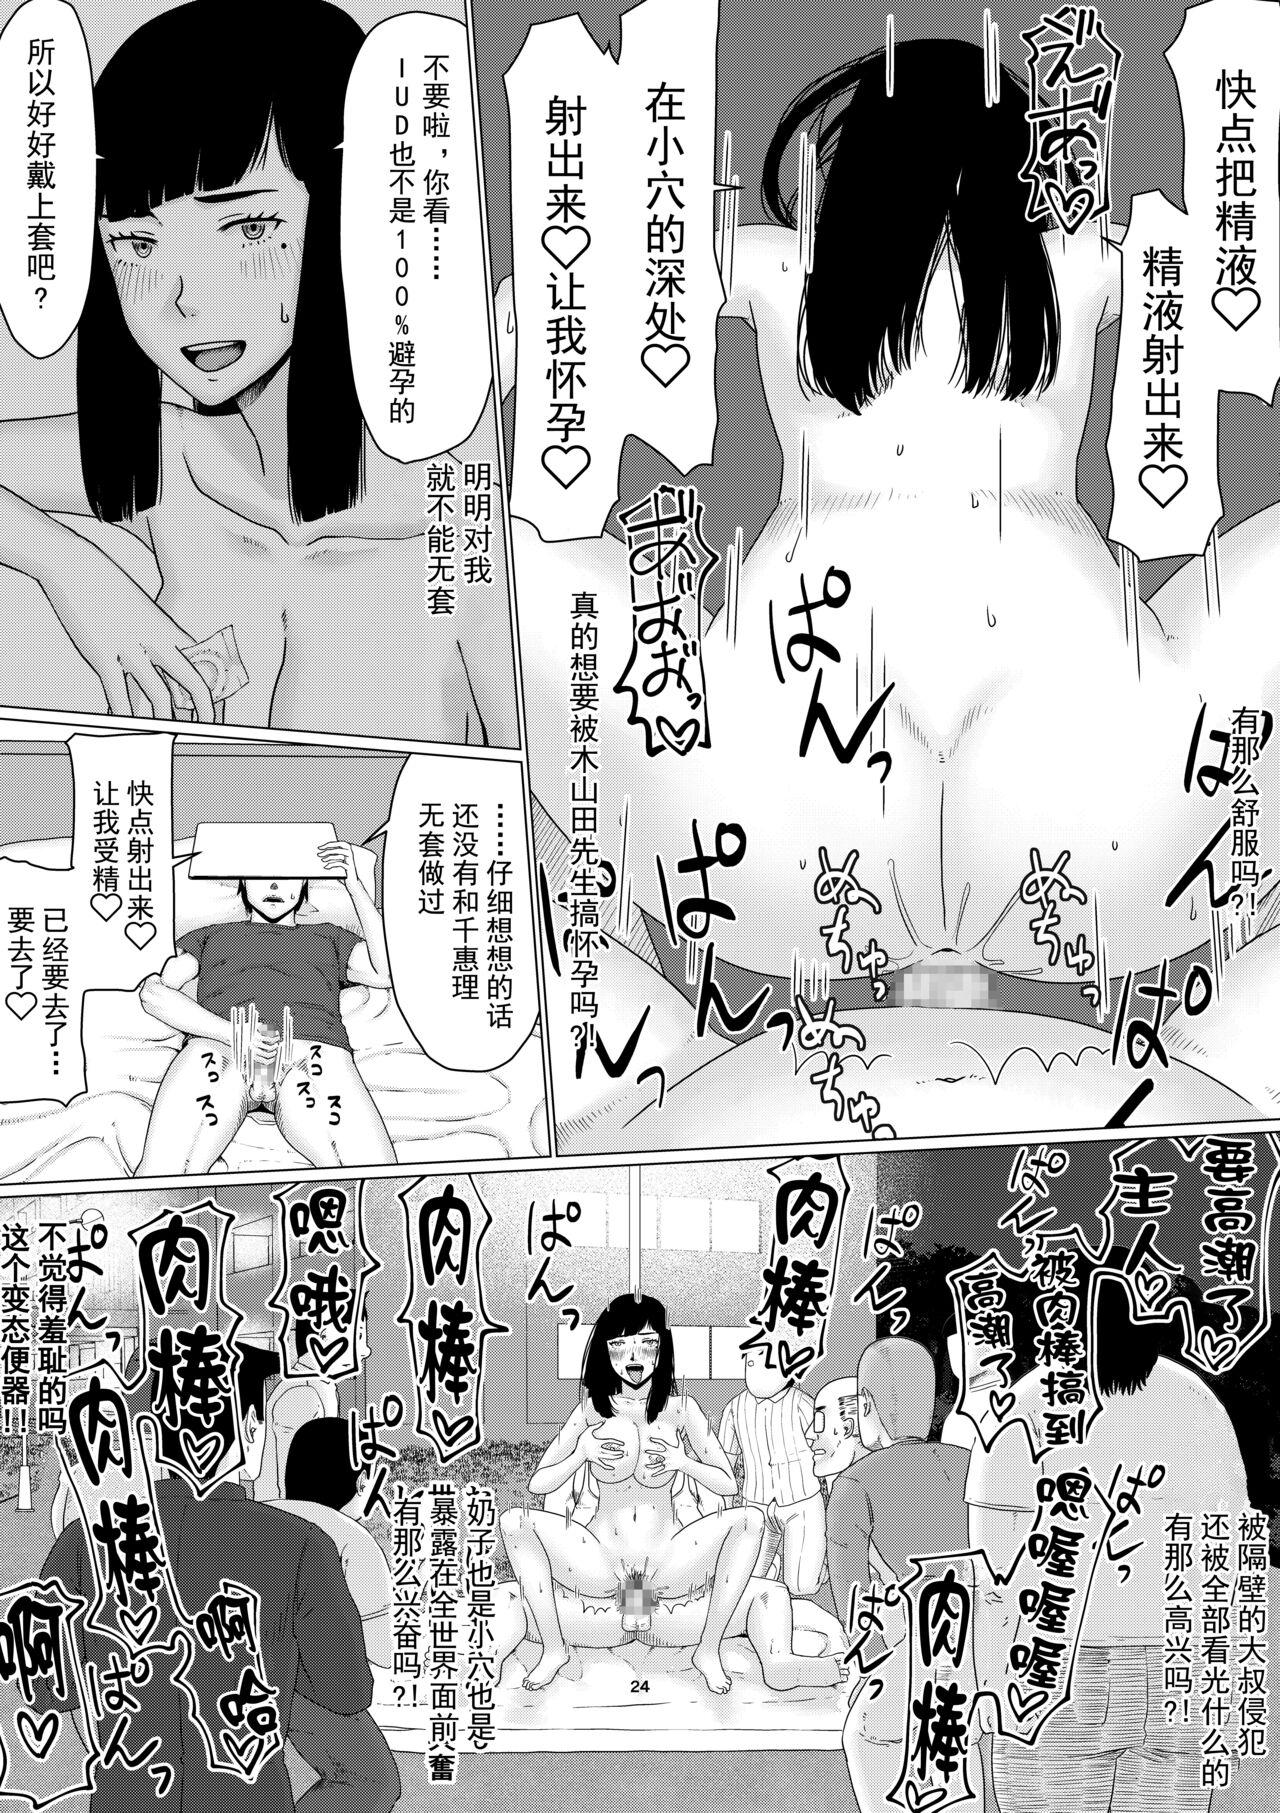 (Dōjinshi) Chieri can't lose!3 -Perverted toilet wife who fertilizes anyone's sperm with her husband's approval- Volume 1 (Original) [Chinese][超勇漢化組] 25